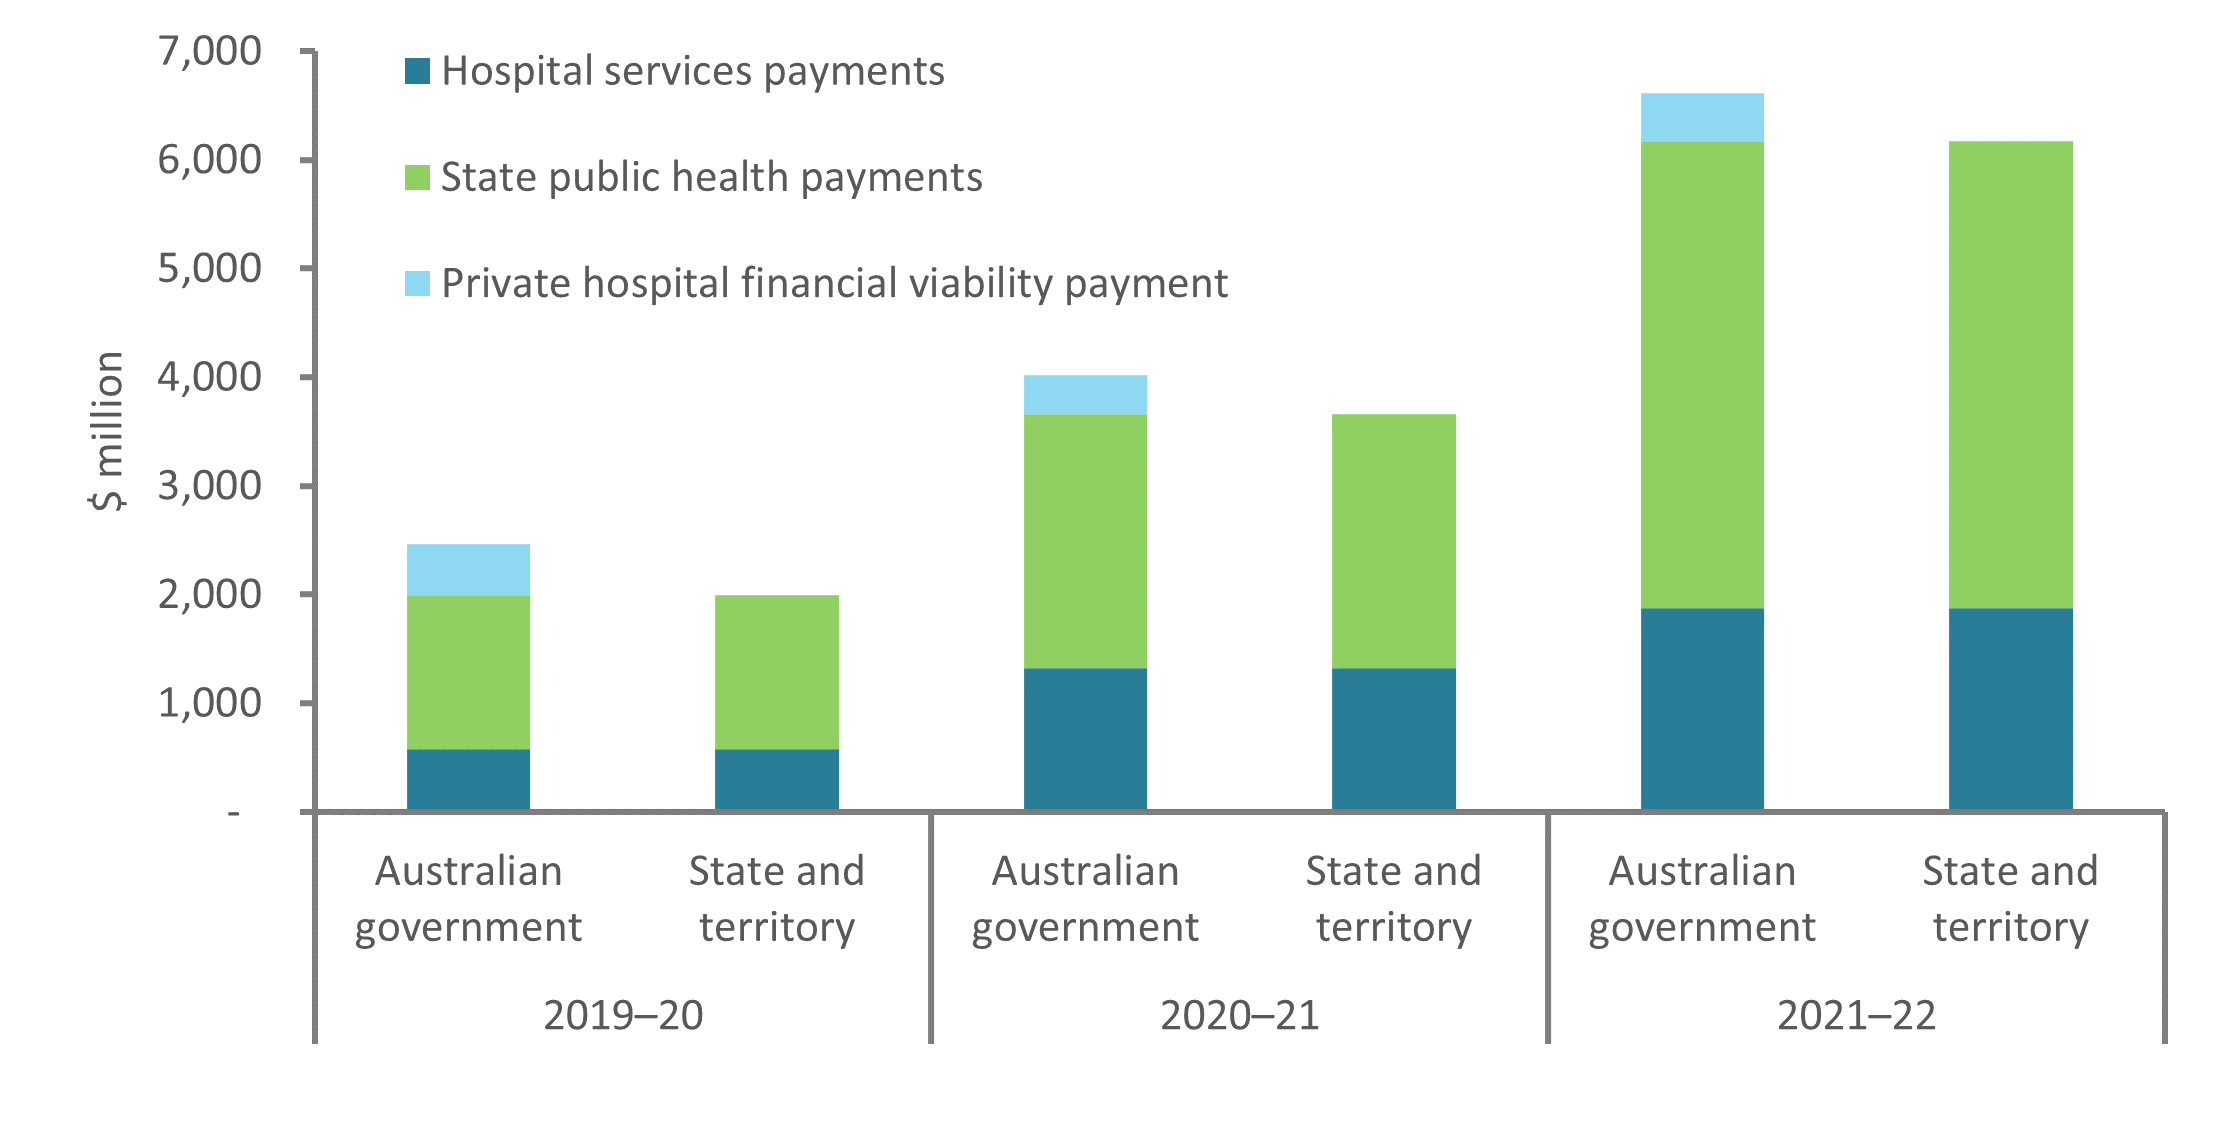 The stacked column chart shows the NPCR contribution by Australian government and state and territory governments from 2019-20 to 2021-22. The contribution was equal from both Australian government and state and territory governments towards the hospital services payments and state public health payments. For private hospital financial viability payments, only the Australian government contributed. The SPHP doubled with each year and the total NPCR payments increased from 2019-20 to 2021-22